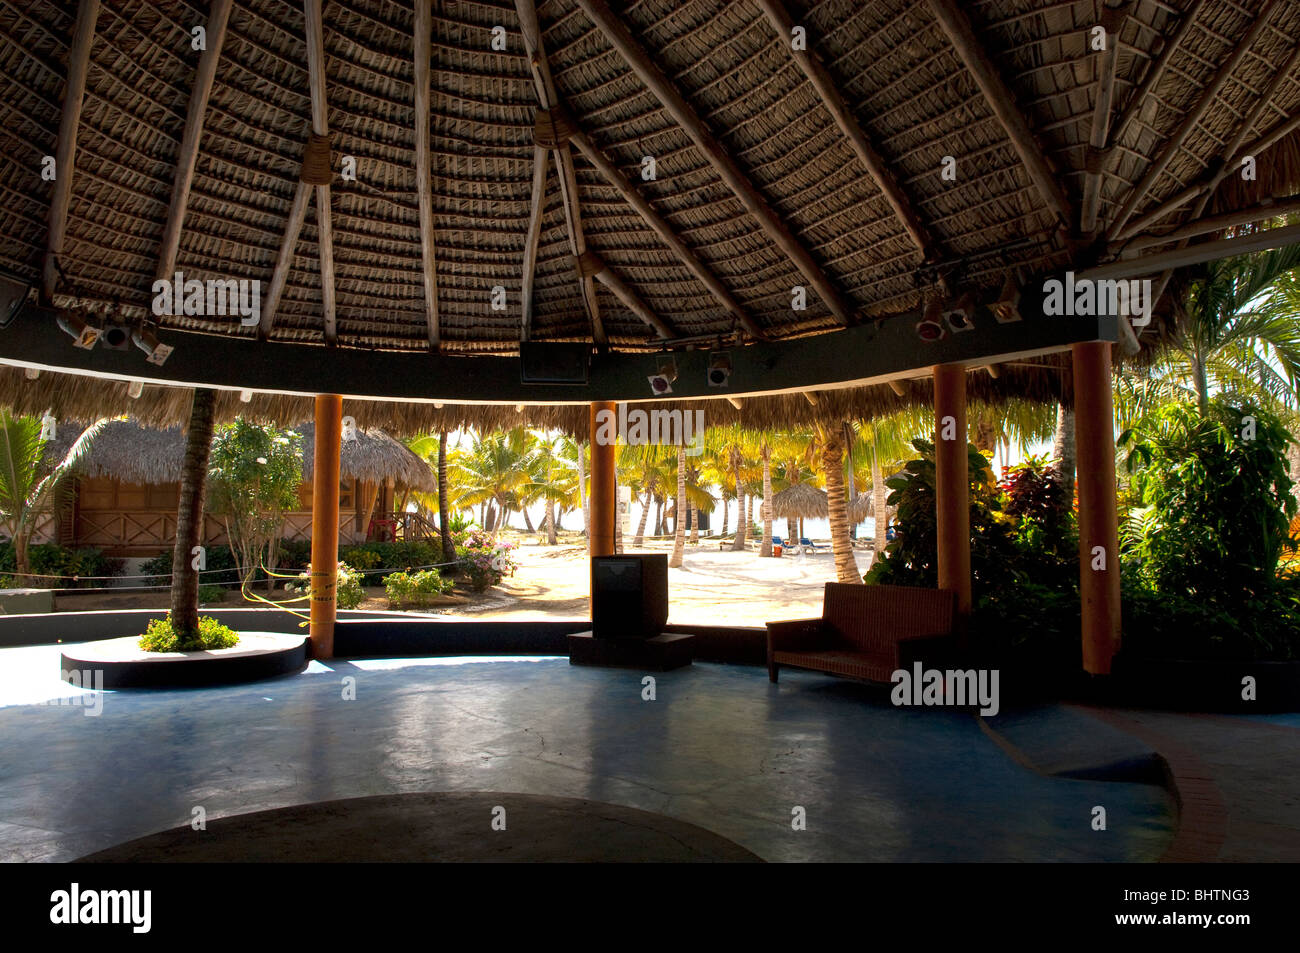 Palapa Structure Inside of the Dome Roof. Stock Photo